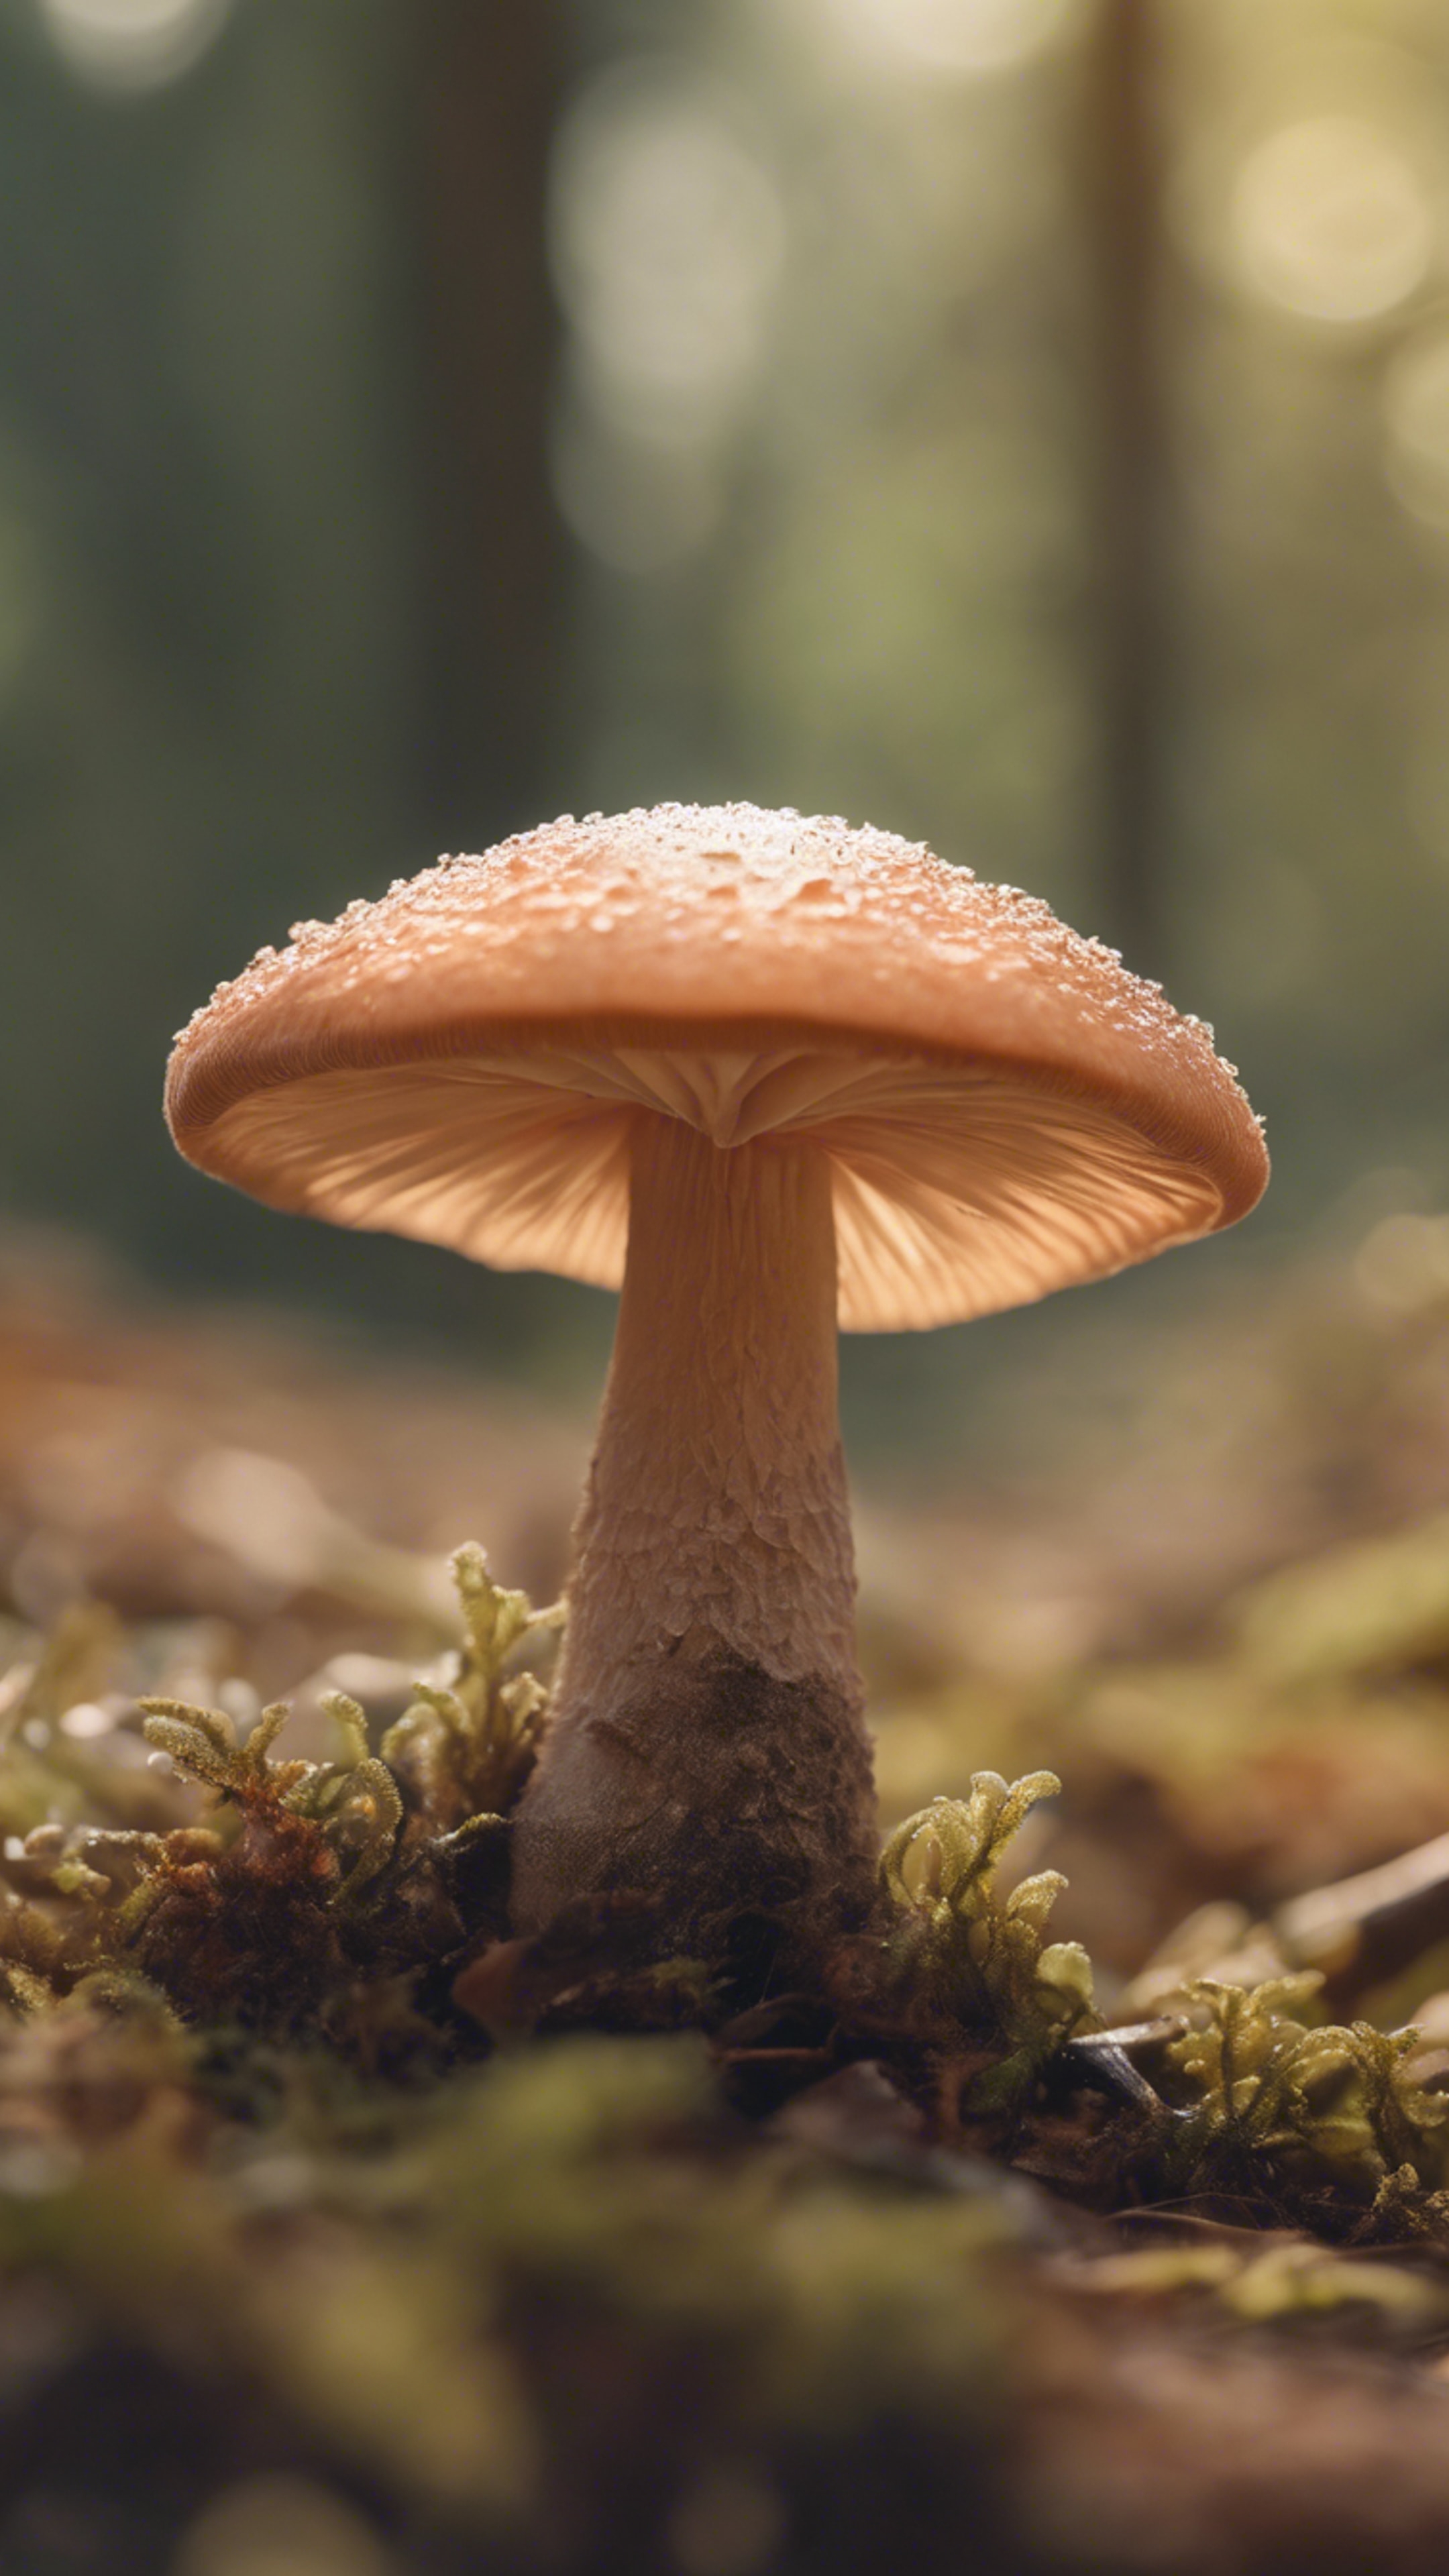 A close-up of a small, cute mushroom, peach color, with soft, sunlit forest scenery in the background. Tapetai[125df3bad49b42d8bf38]